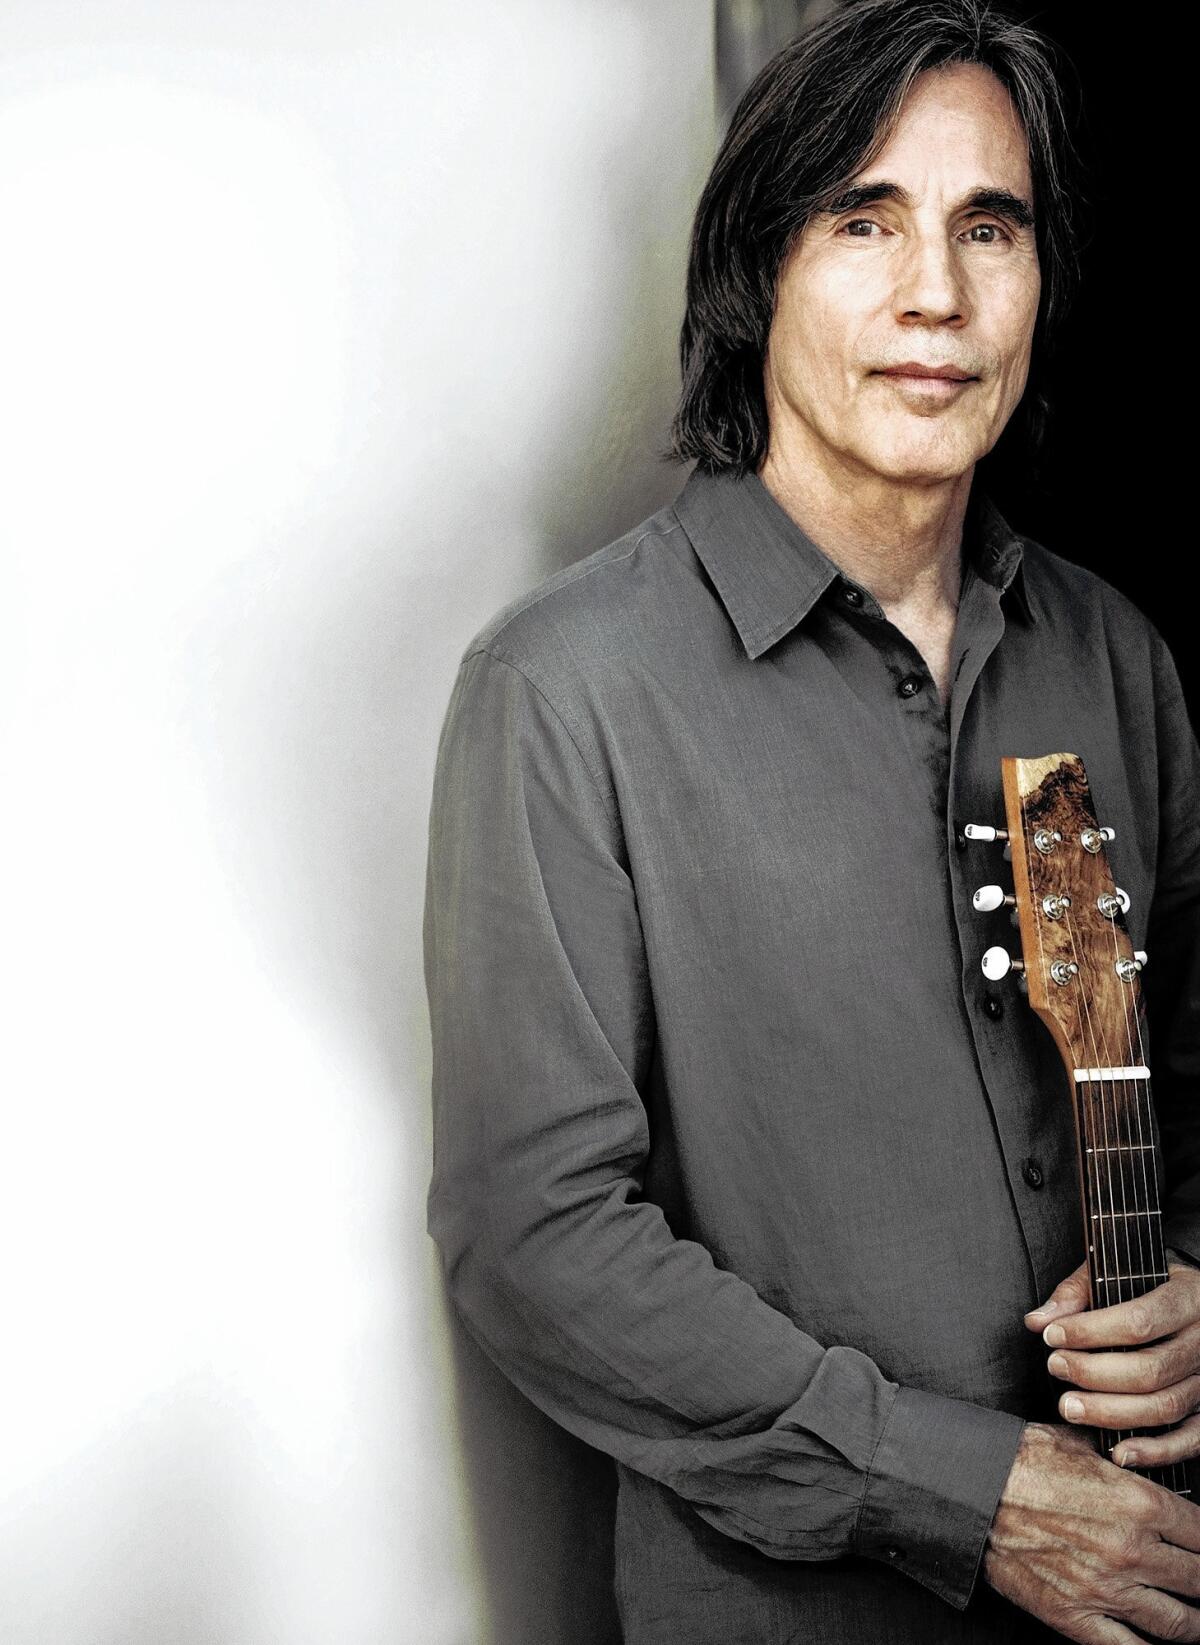 Jackson Browne performs Friday at Segerstrom Hall.